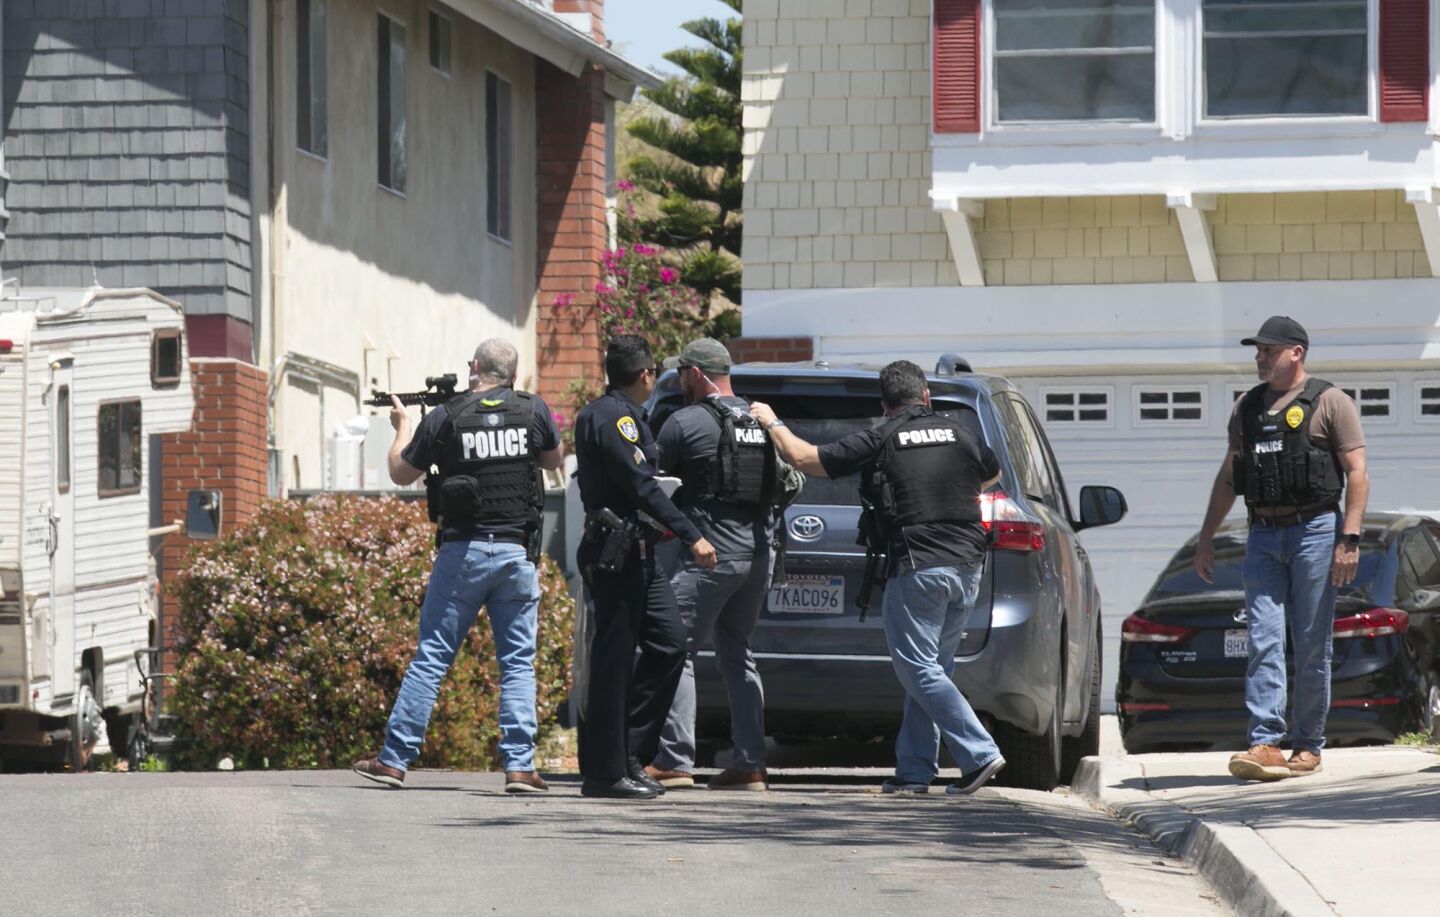 Heavily armed San Diego police officer retreated from a house thought to be the home of 19 year-old John T. Earnest, who is a suspect in the shooting of four people in a Poway synagogue, killing one, on Saturday April 27, 2019 in San Diego, California. The house is on a cut de sac in the Rancho Peñasquitos neighborhood in the north part of the city.